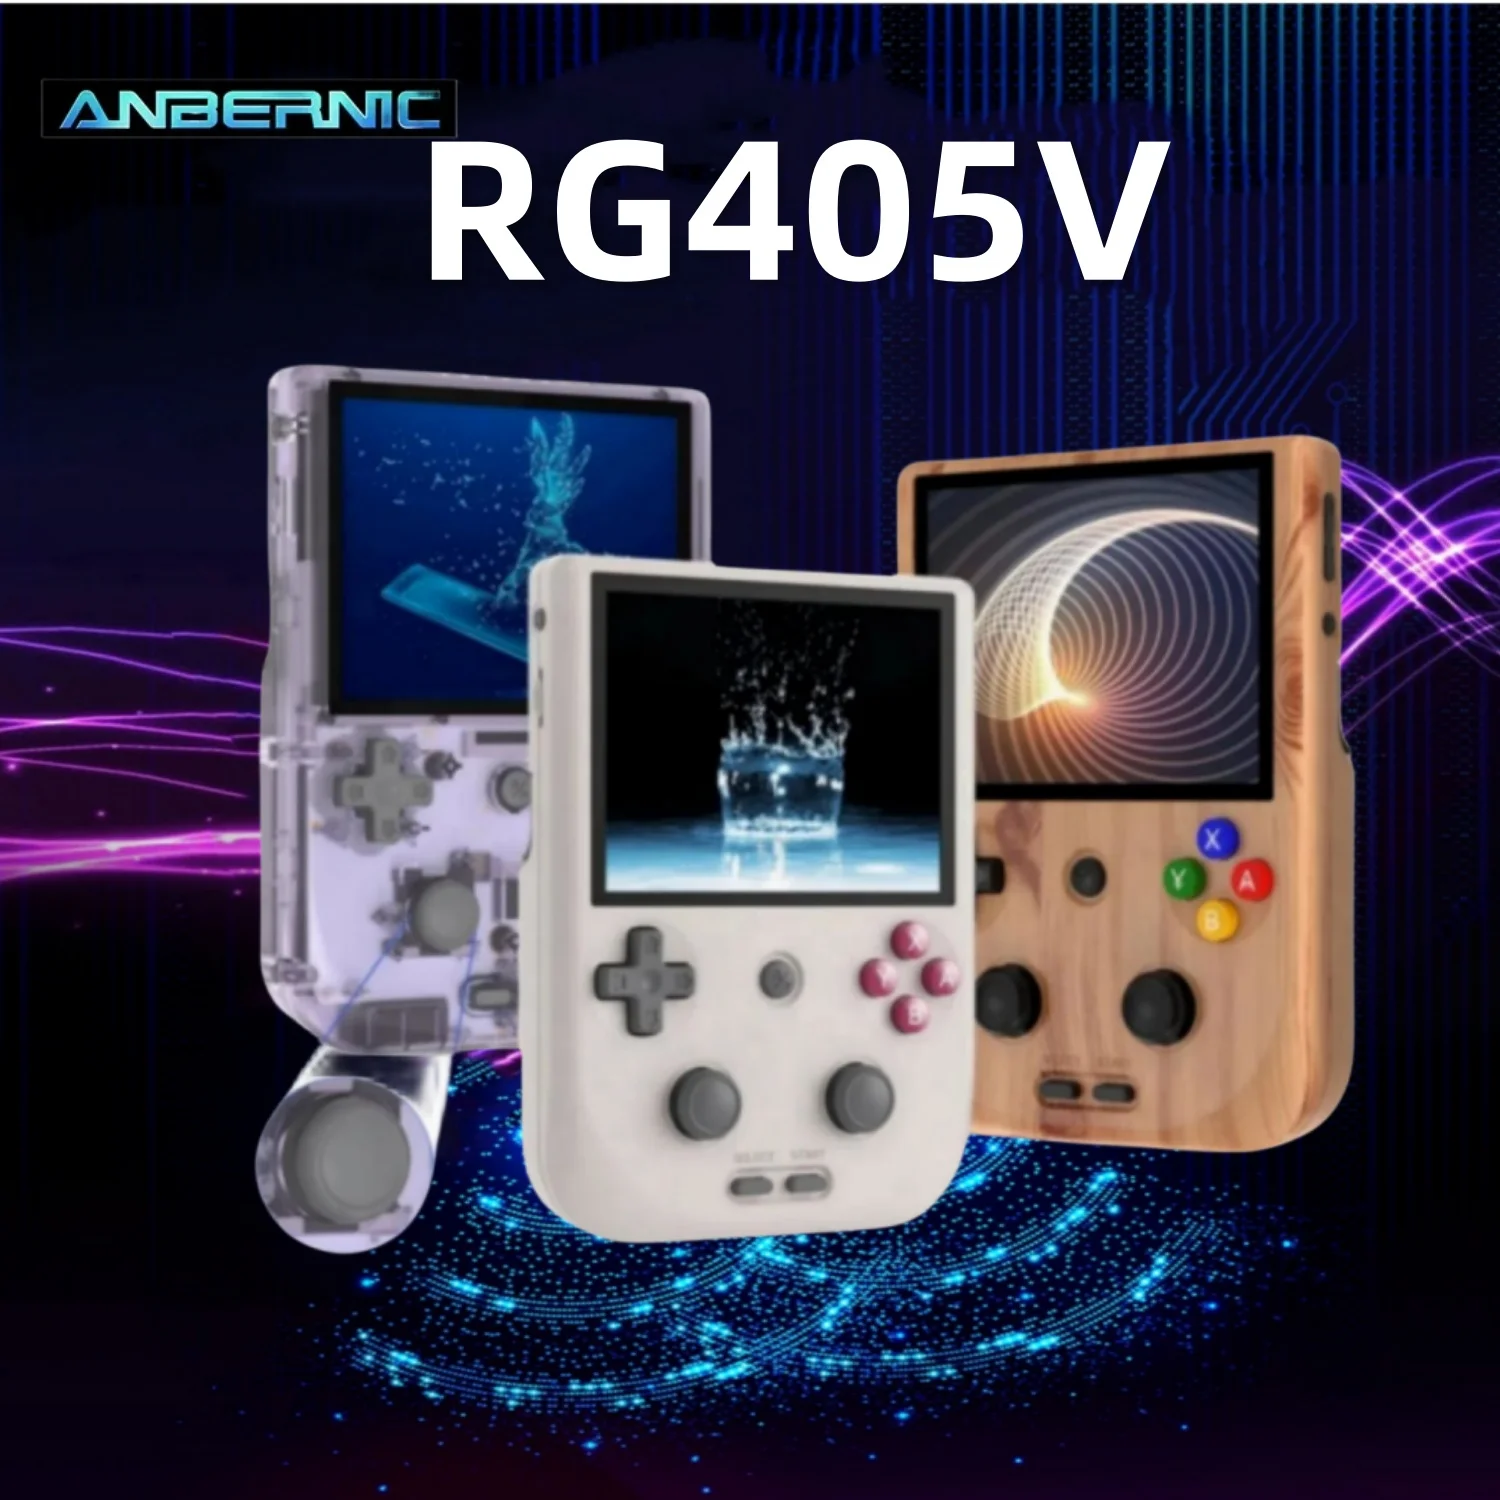 

ANBERNIC RG405V Portable Retro Handheld Game Console gaming super video mini electronic PSP PS2 gamepad Player